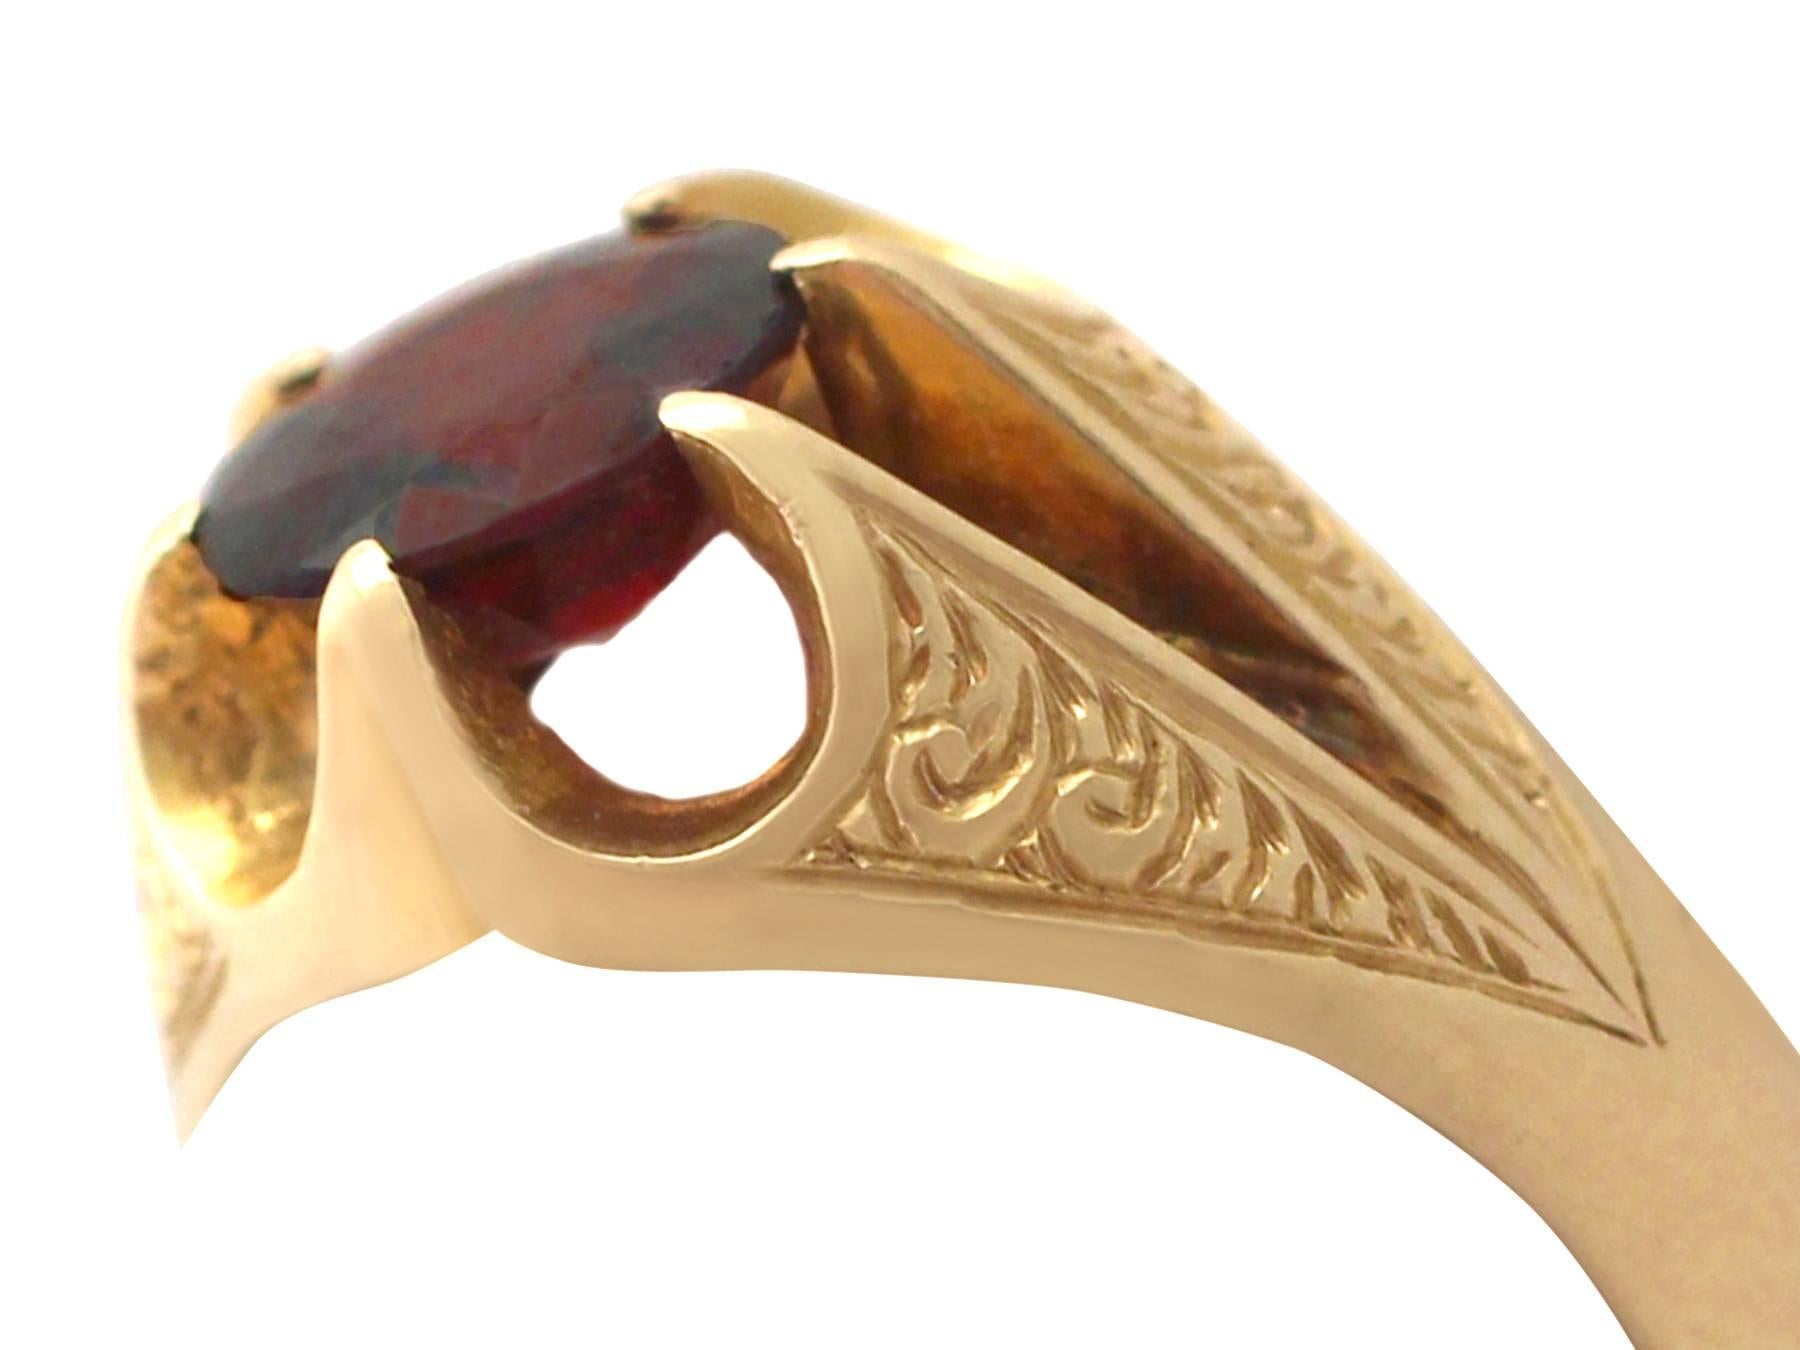 A fine and impressive antique 1.52 carat garnet ring in 18k yellow gold; part of our diverse gemstone jewellery collections

This fine antique garnet ring has been crafted in 18k yellow gold.

The impressive design displays an six claw set round